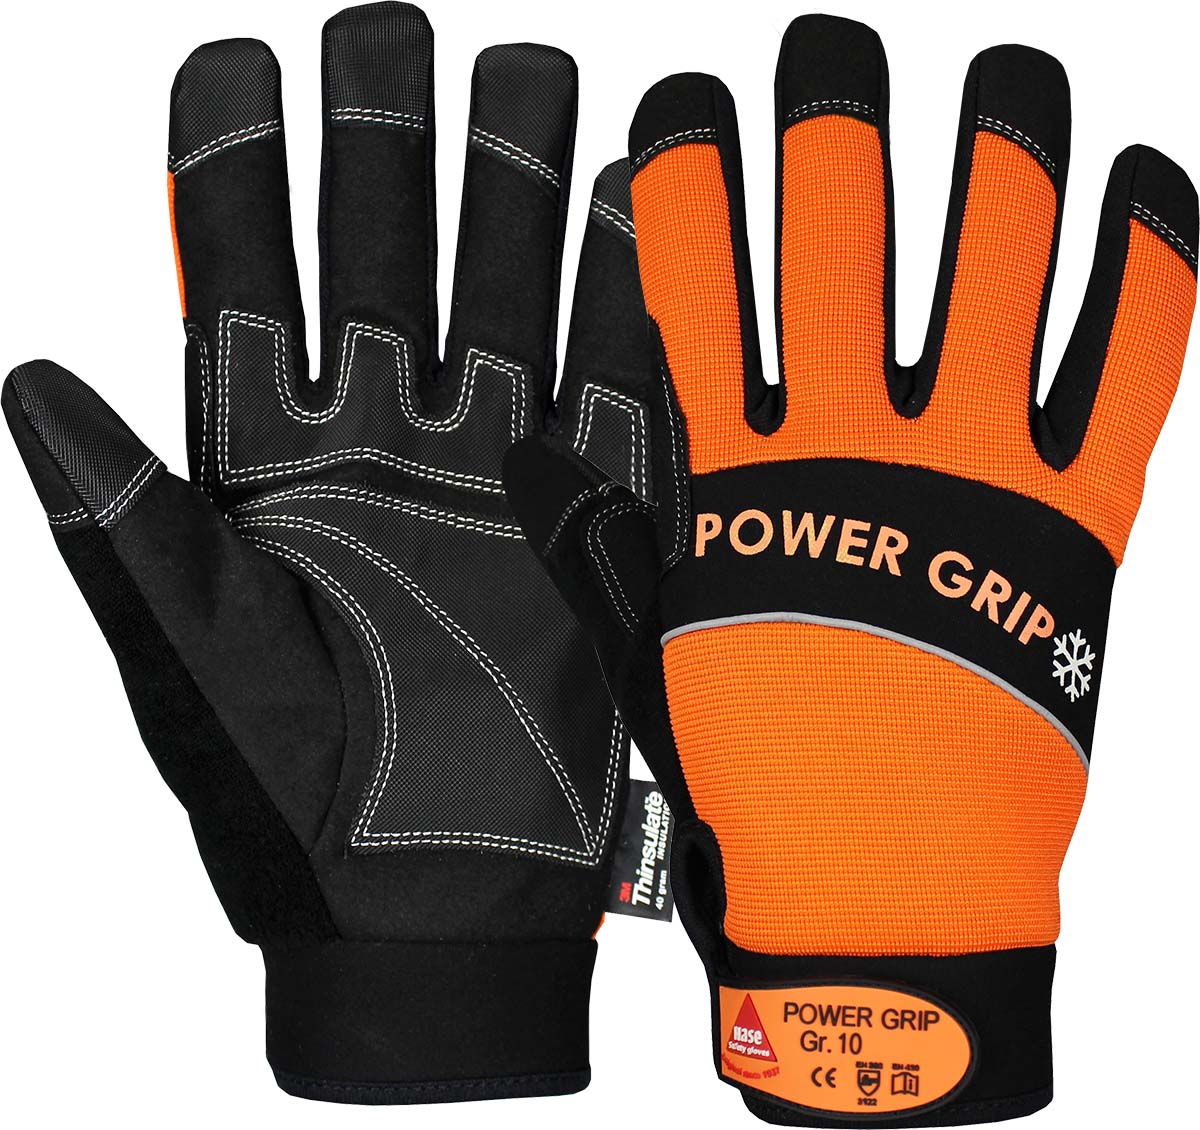 HASE Winter-/Montagehandschuh "Power Grip Winter" Nr. 402050, VPE: 10 PA